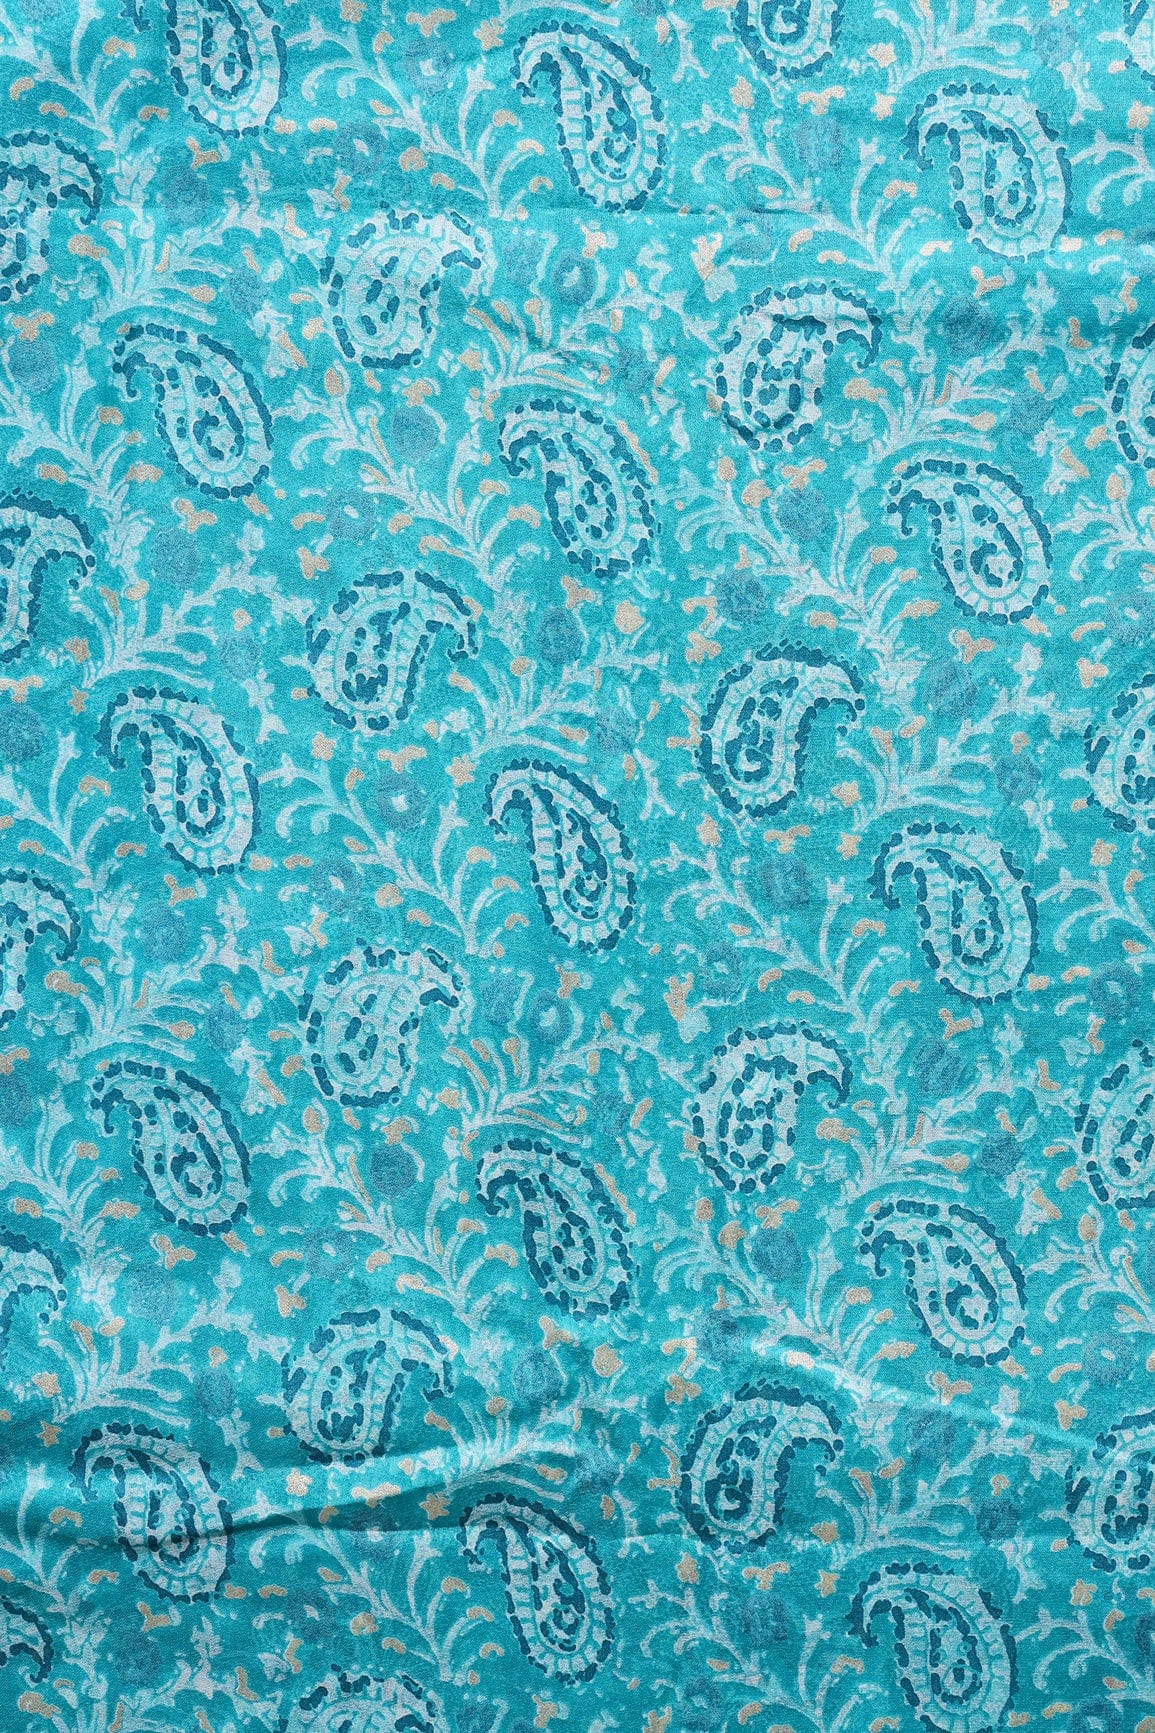 doeraa Prints Turquoise Paisley Pattern With Foil Print On Pure Mul Cotton Fabric